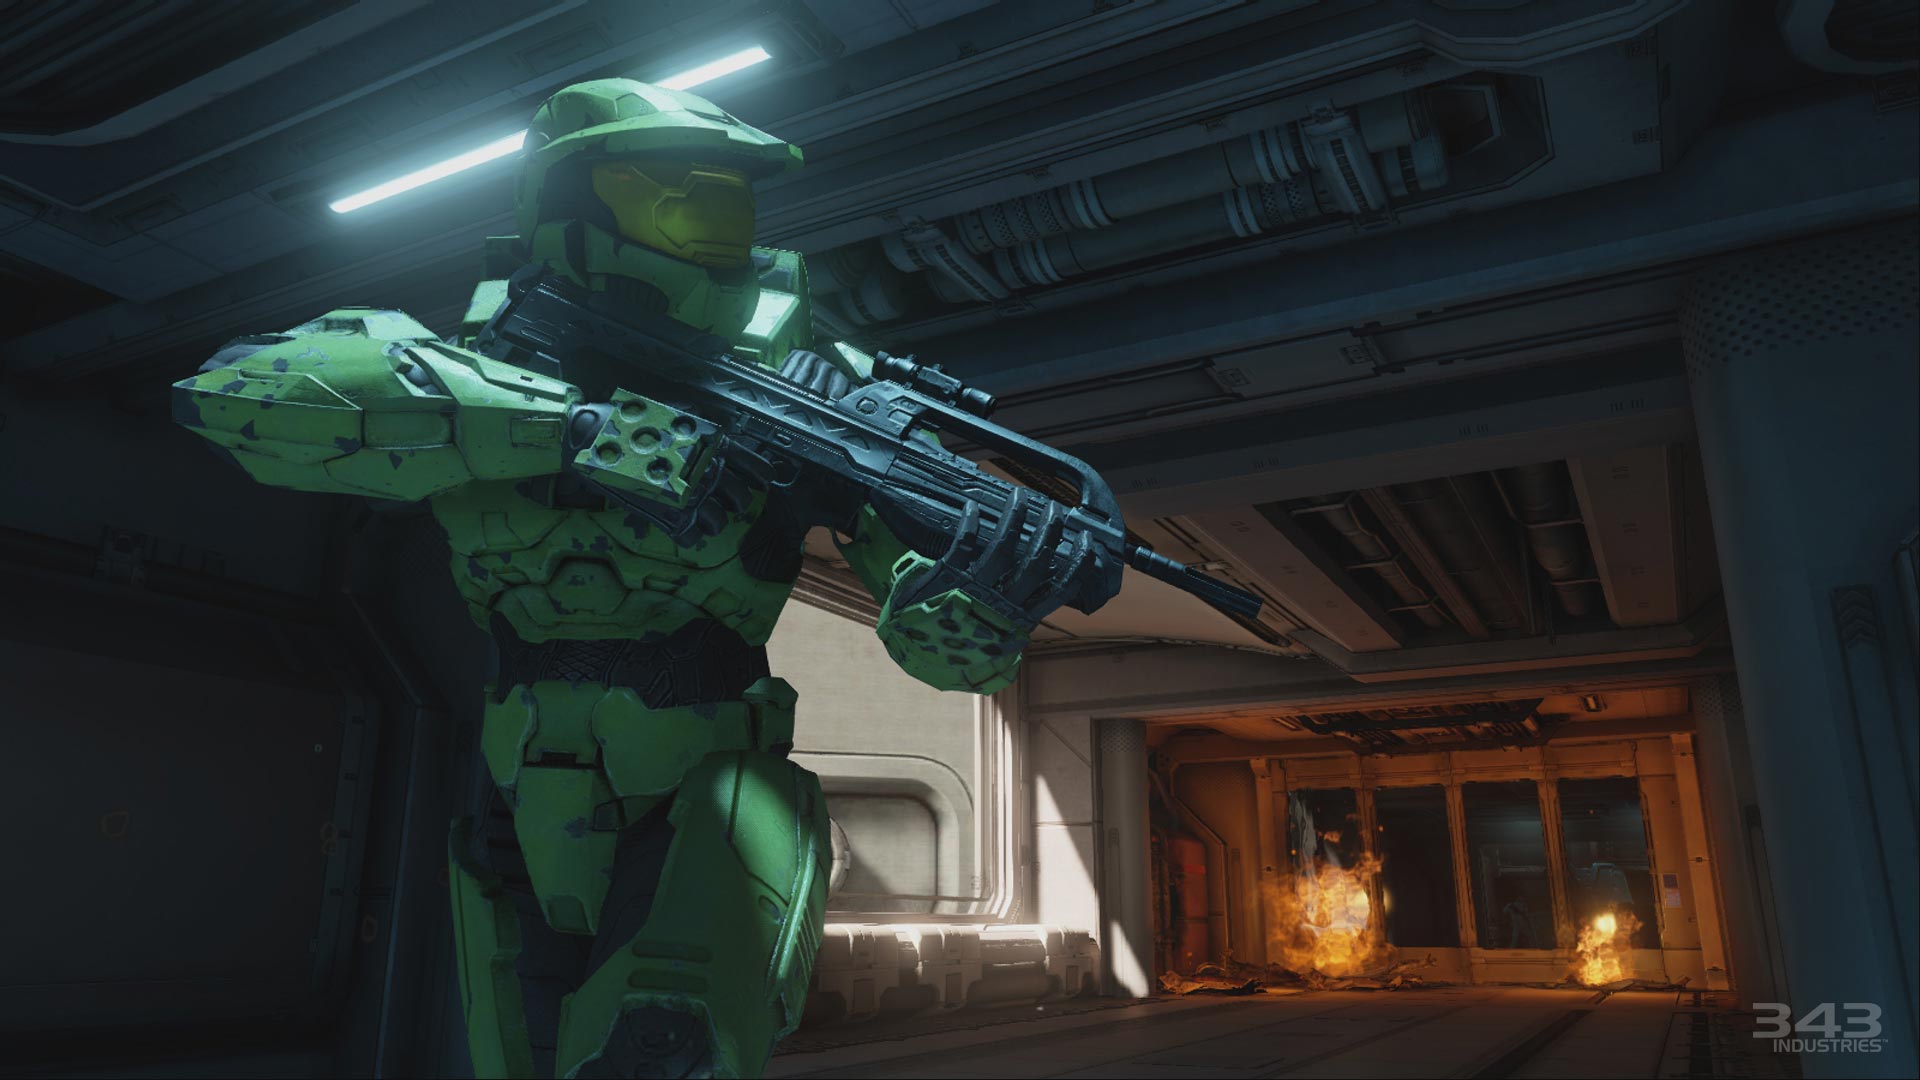 Halo the Series Story Trailer Releases Today - Xbox Wire